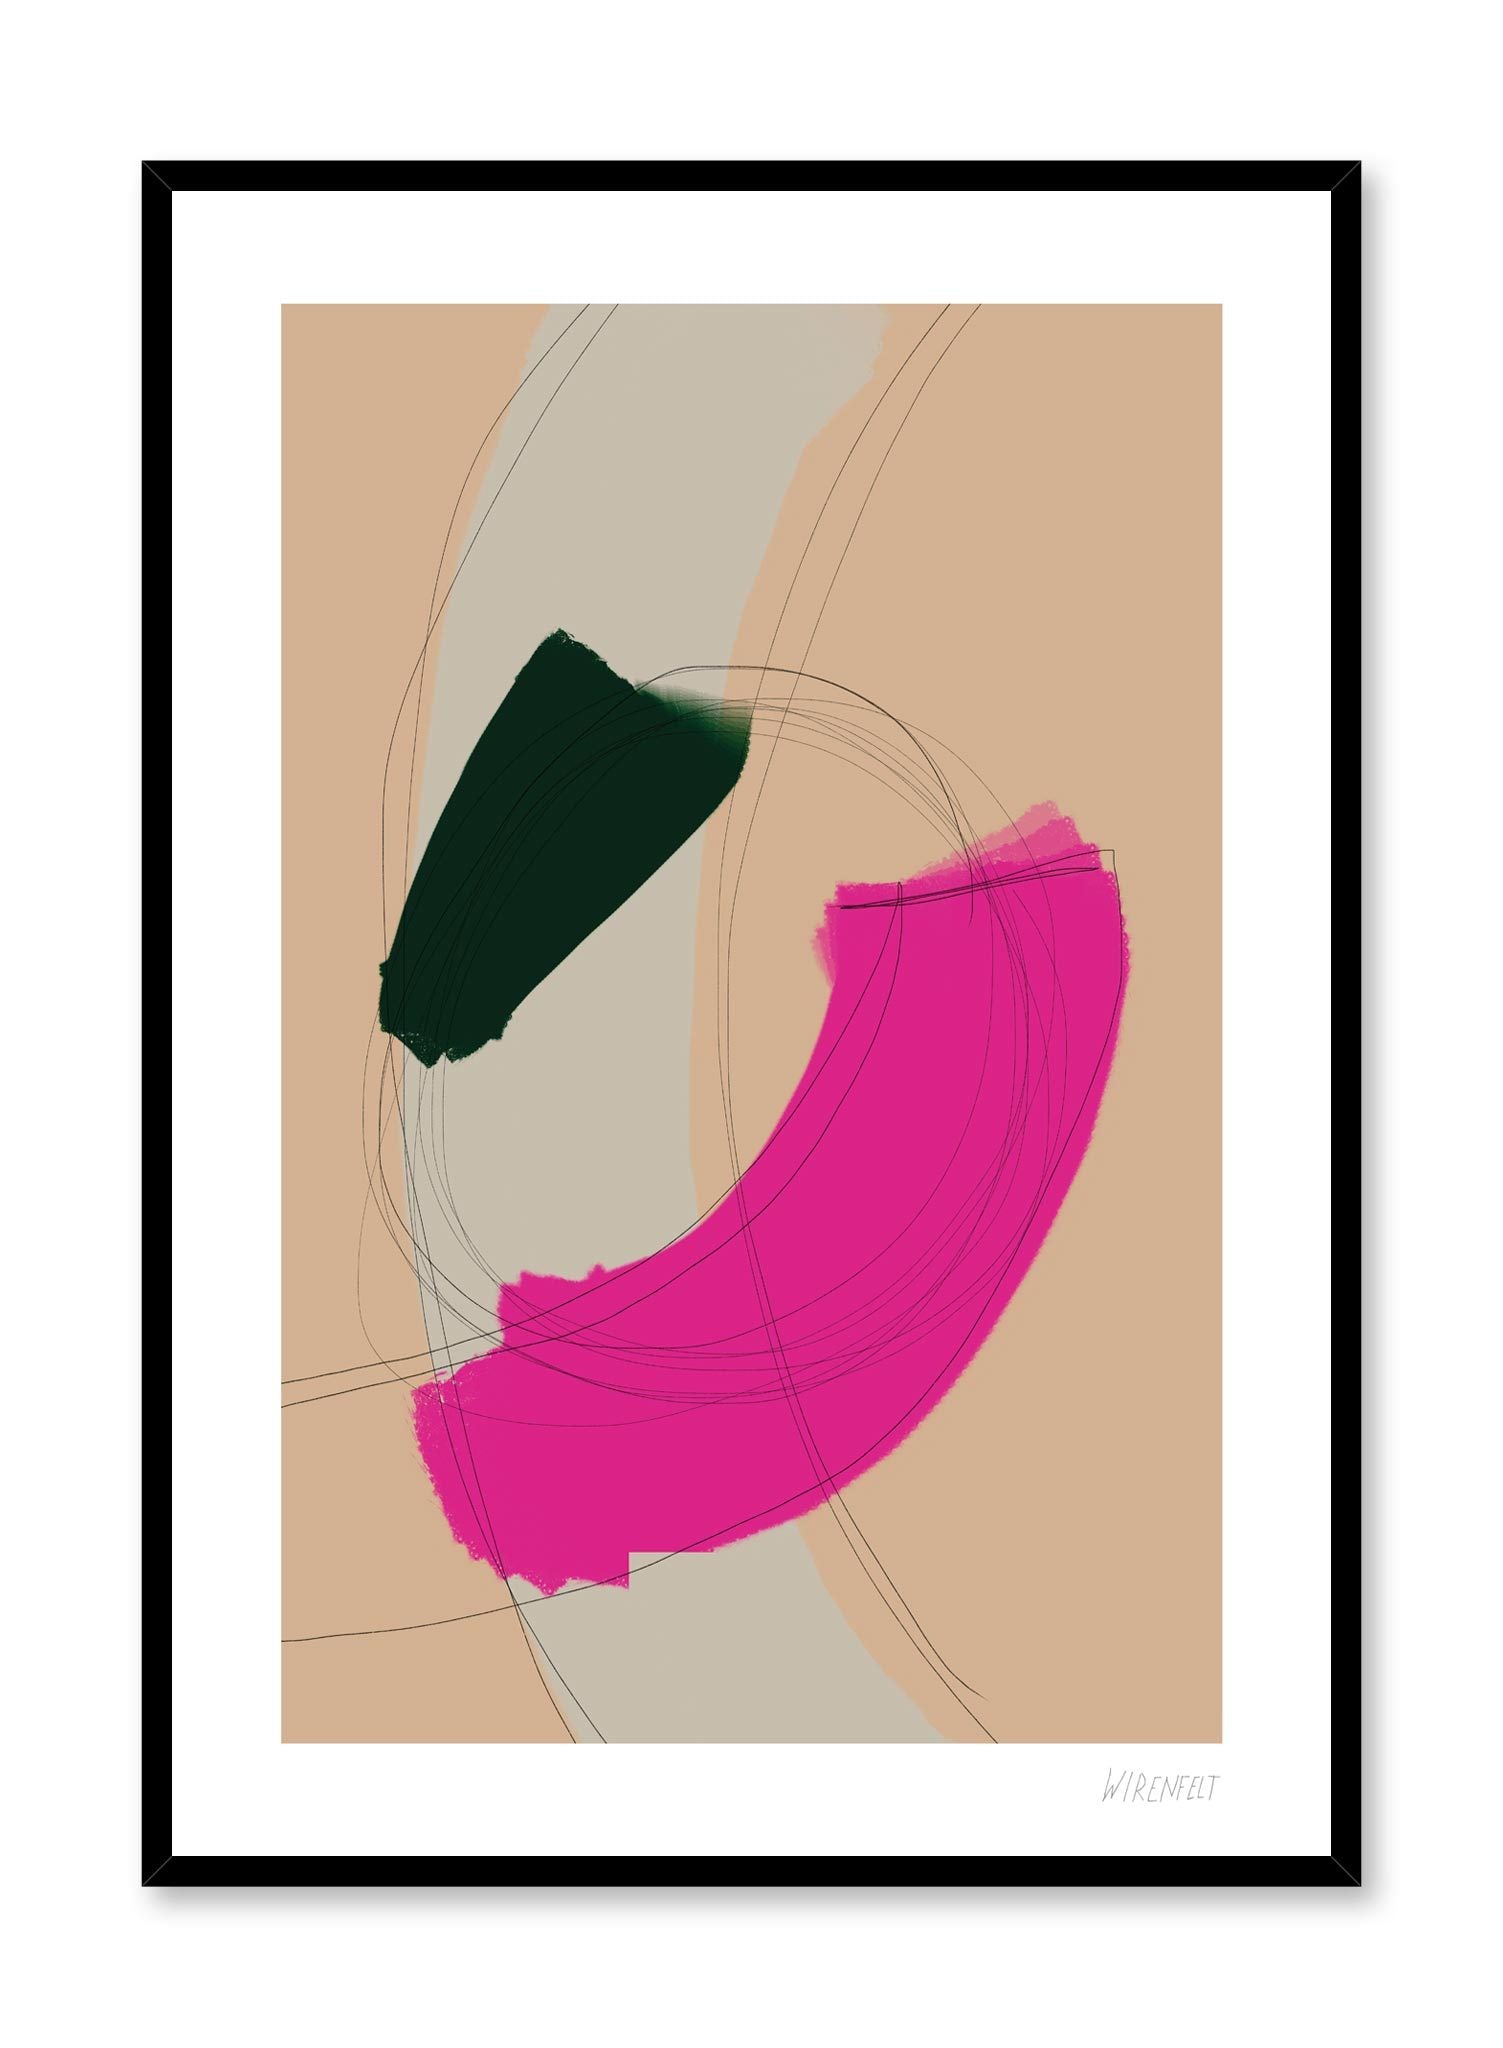 Modern minimalist poster entitled Martini by Opposite Wall with abstract paint design of Loop